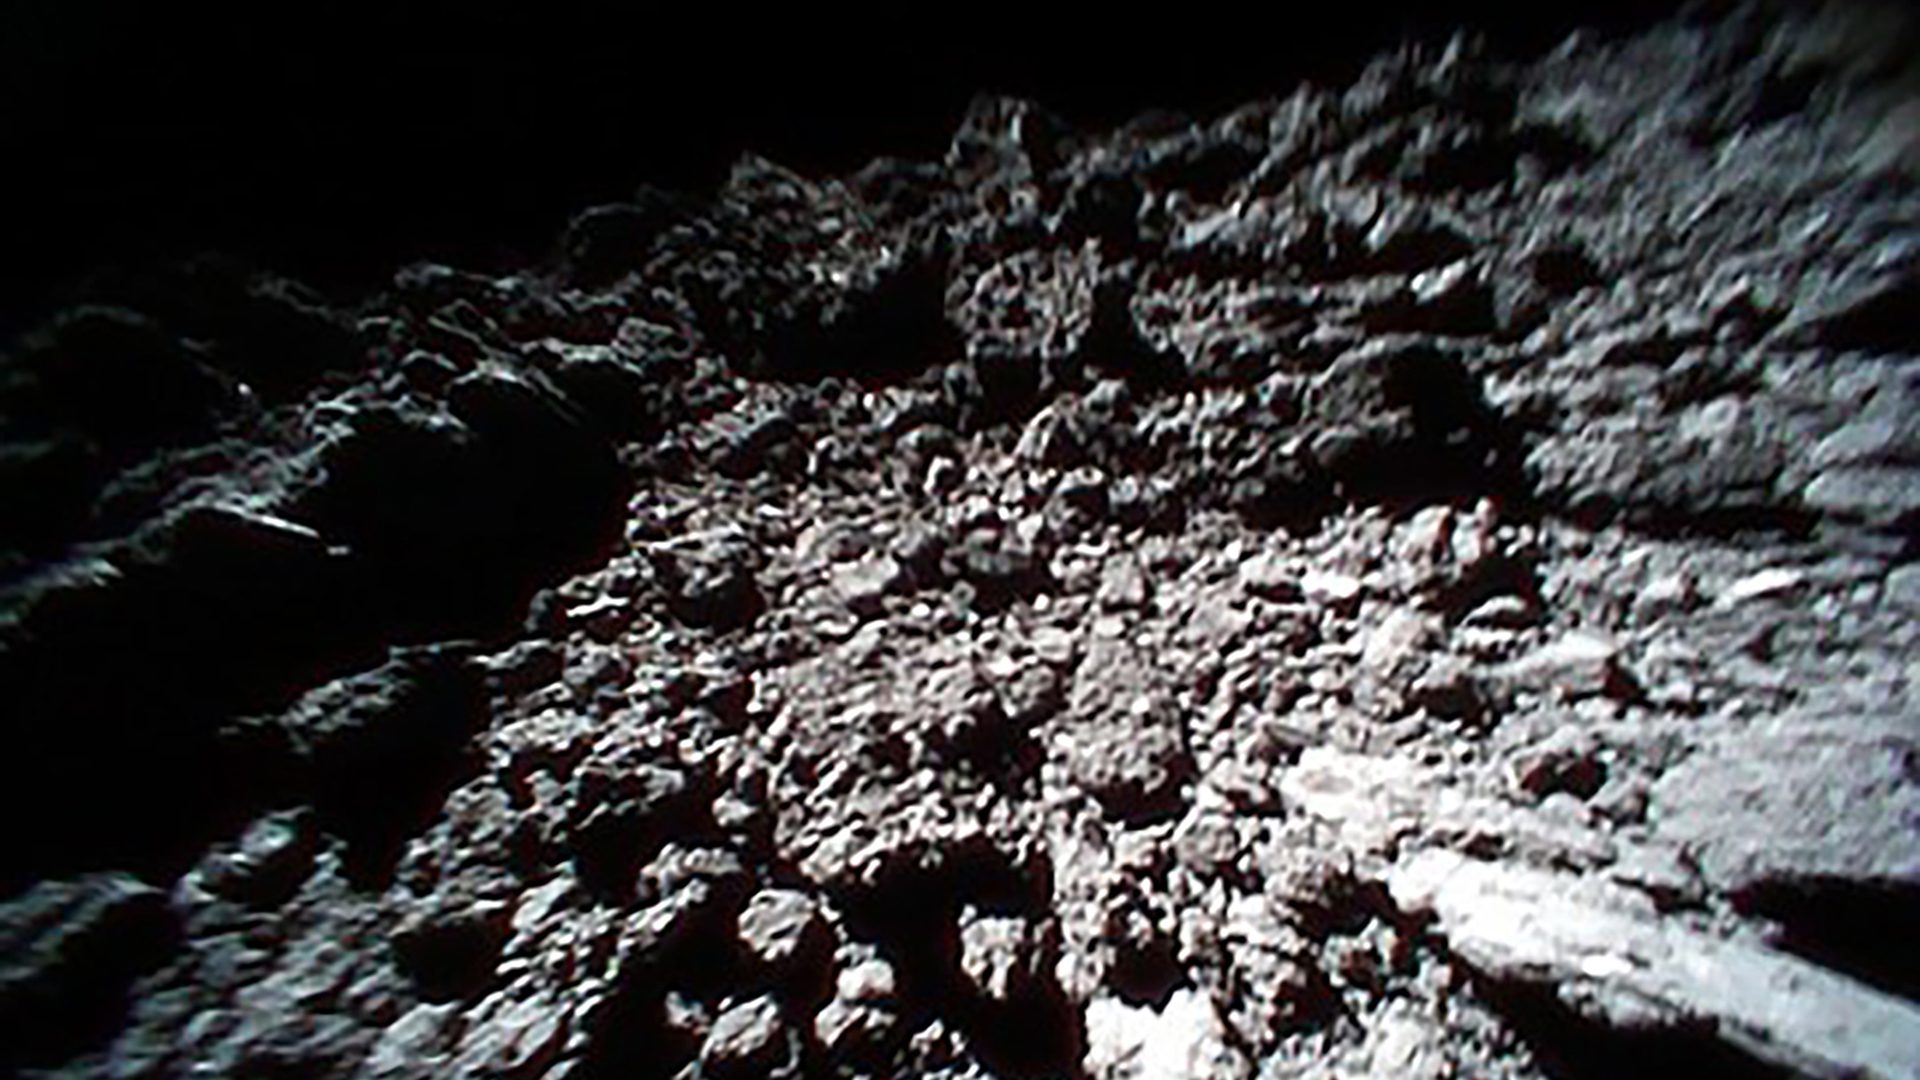 The image was taken by Rober-1B of the MINERVA-II1 spacecraft exploring the asteroid Ryugu.